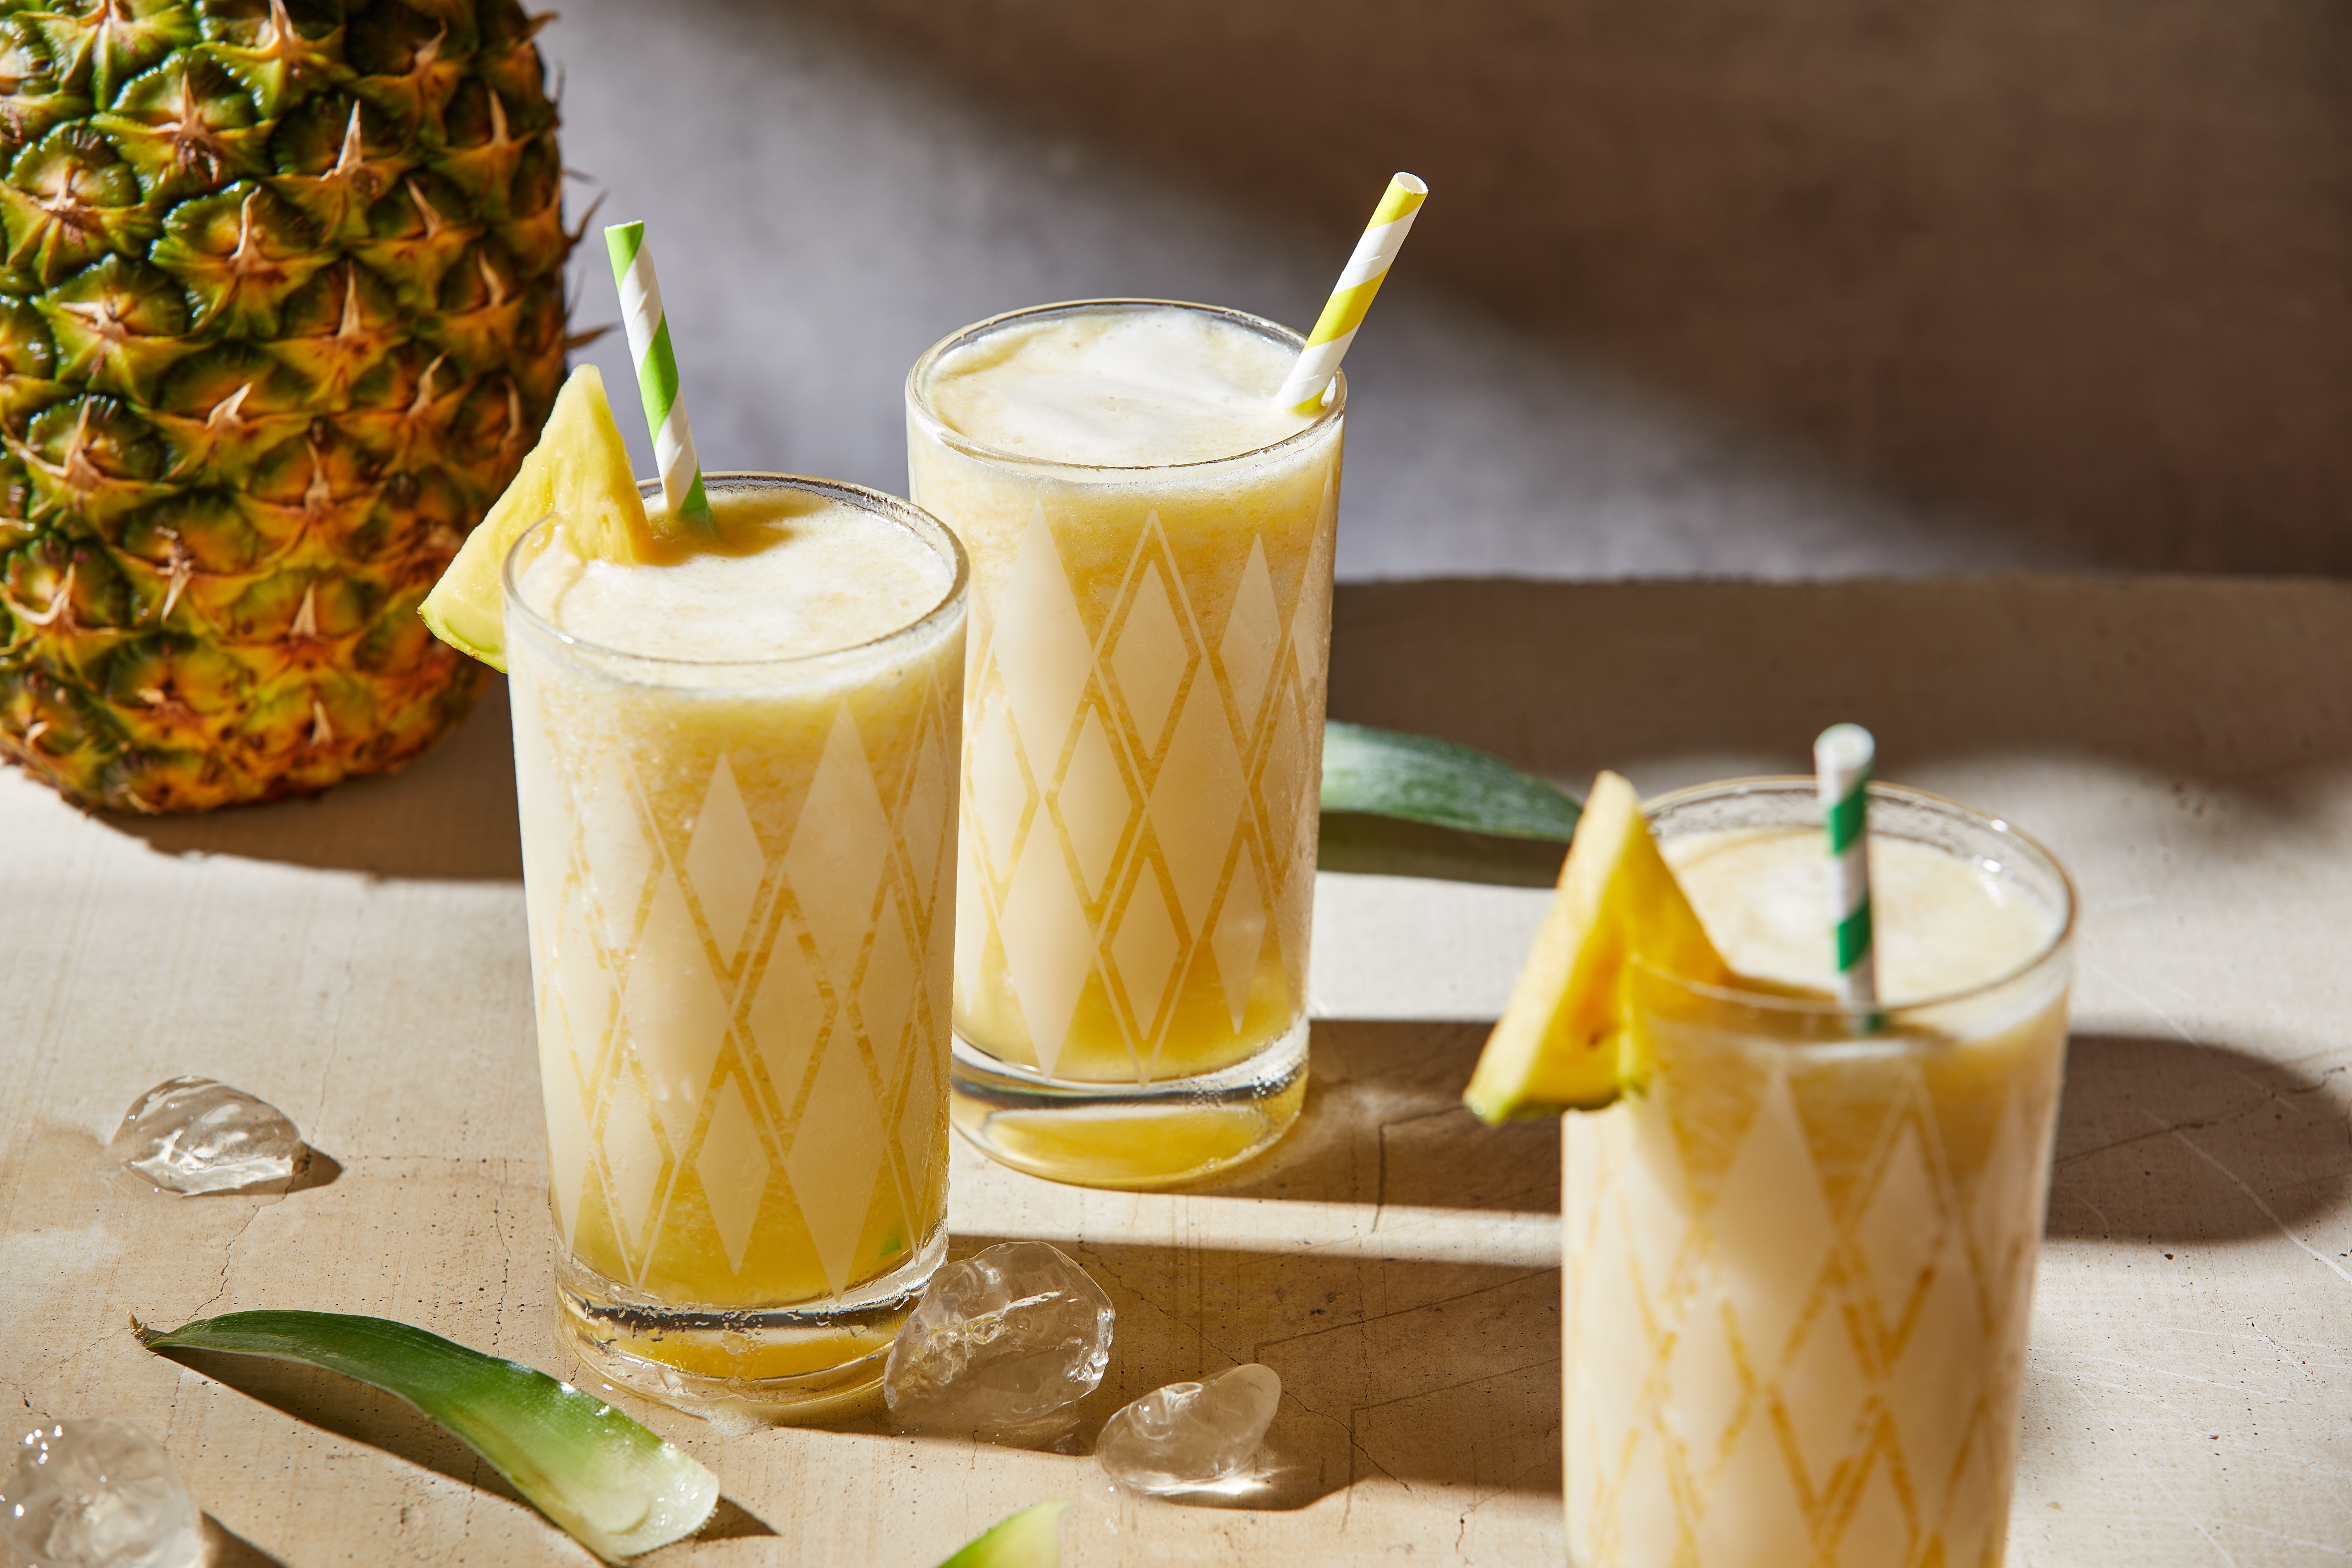 How To Make A Pina Colada Without A Blender